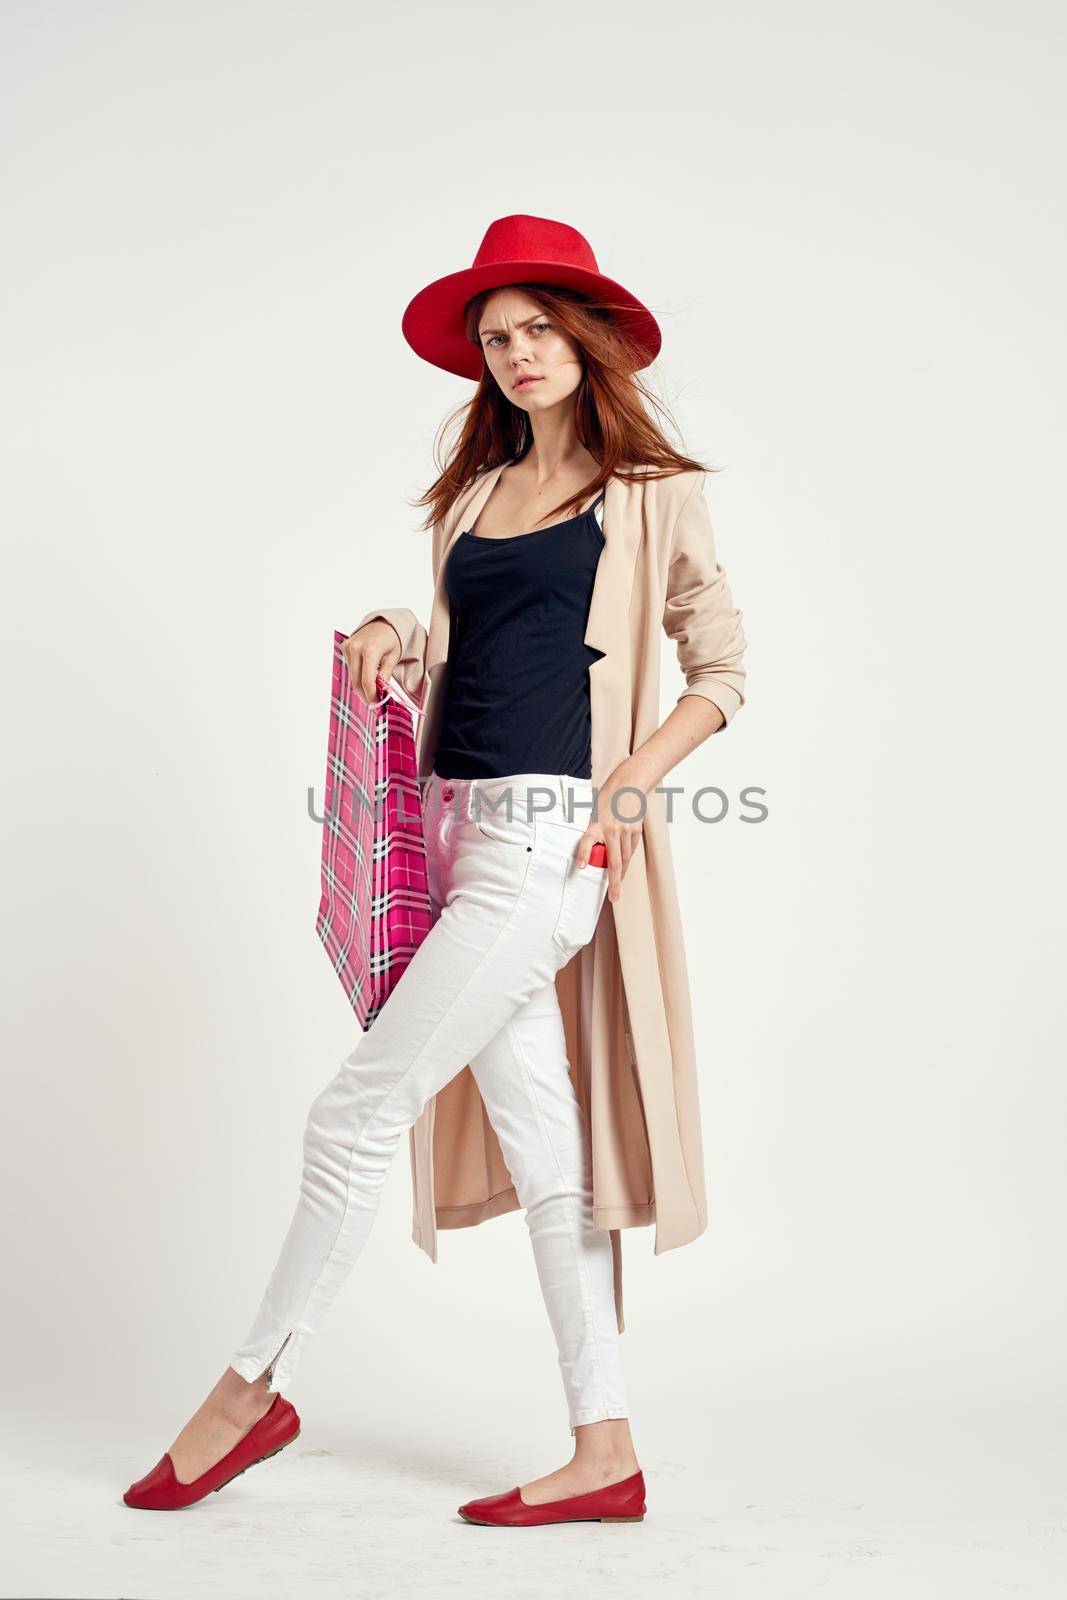 cheerful woman wearing a red hat posing shopping fun isolated background. High quality photo